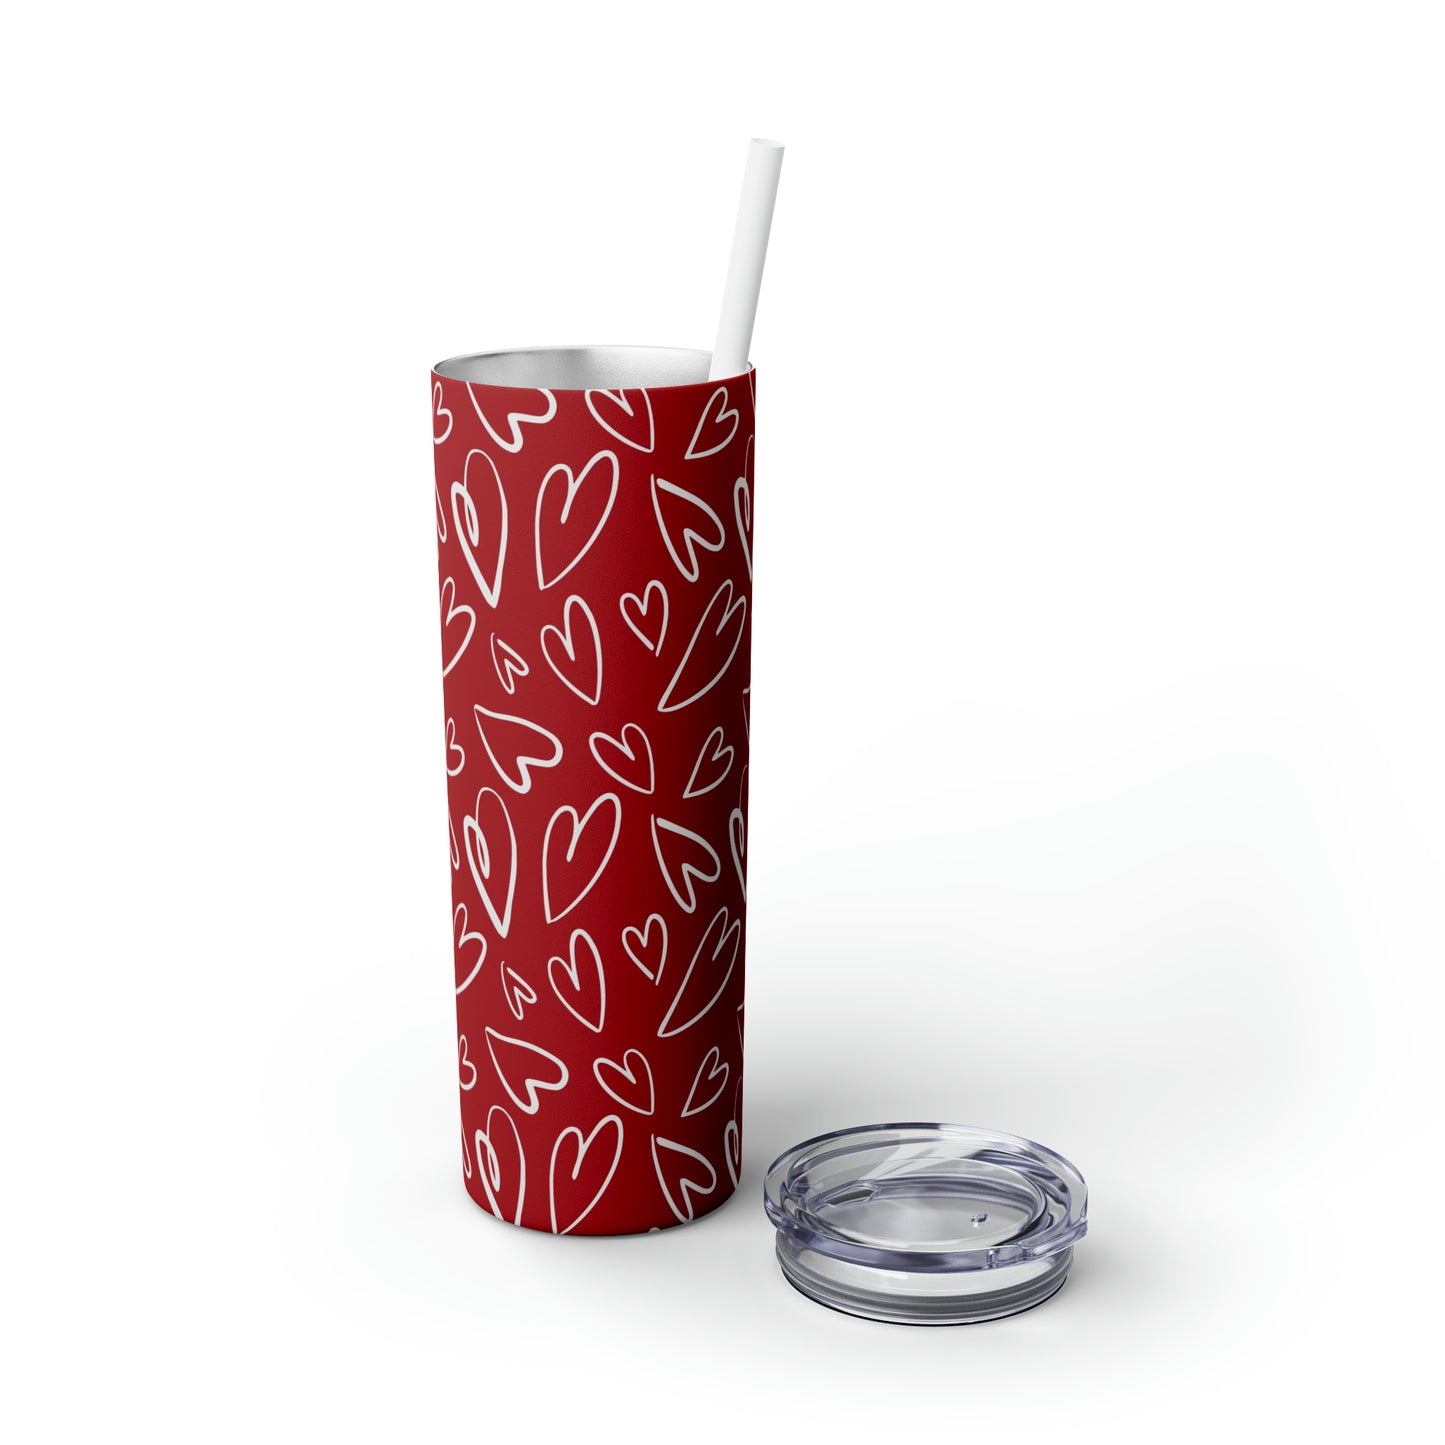 Red with White Hearts - Hand Drawn - Skinny Tumbler with Straw, 20oz - Stainless Steel